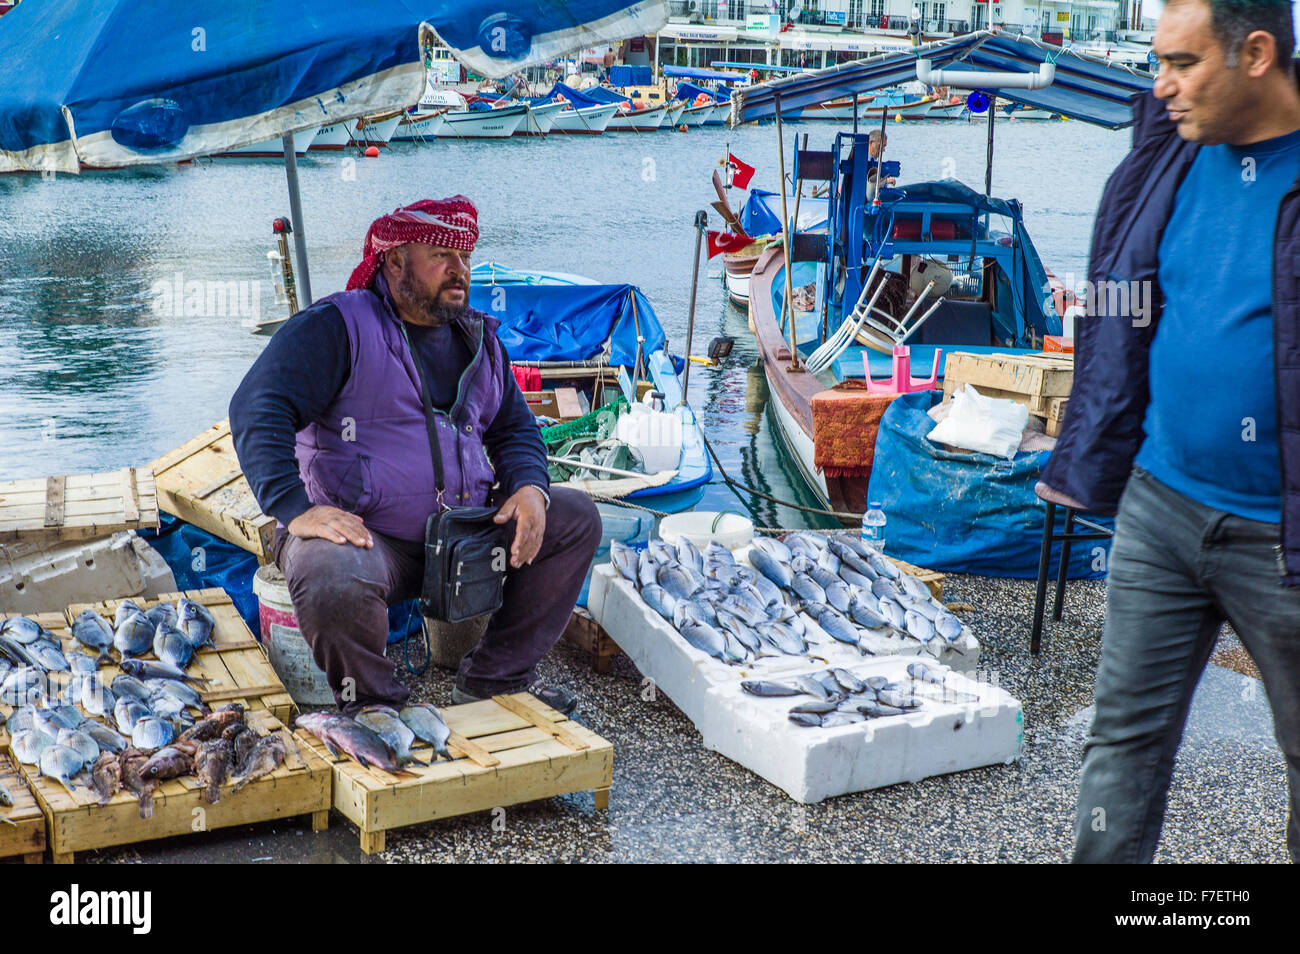 The fish seller: Will someone buy my fish? Stock Photo